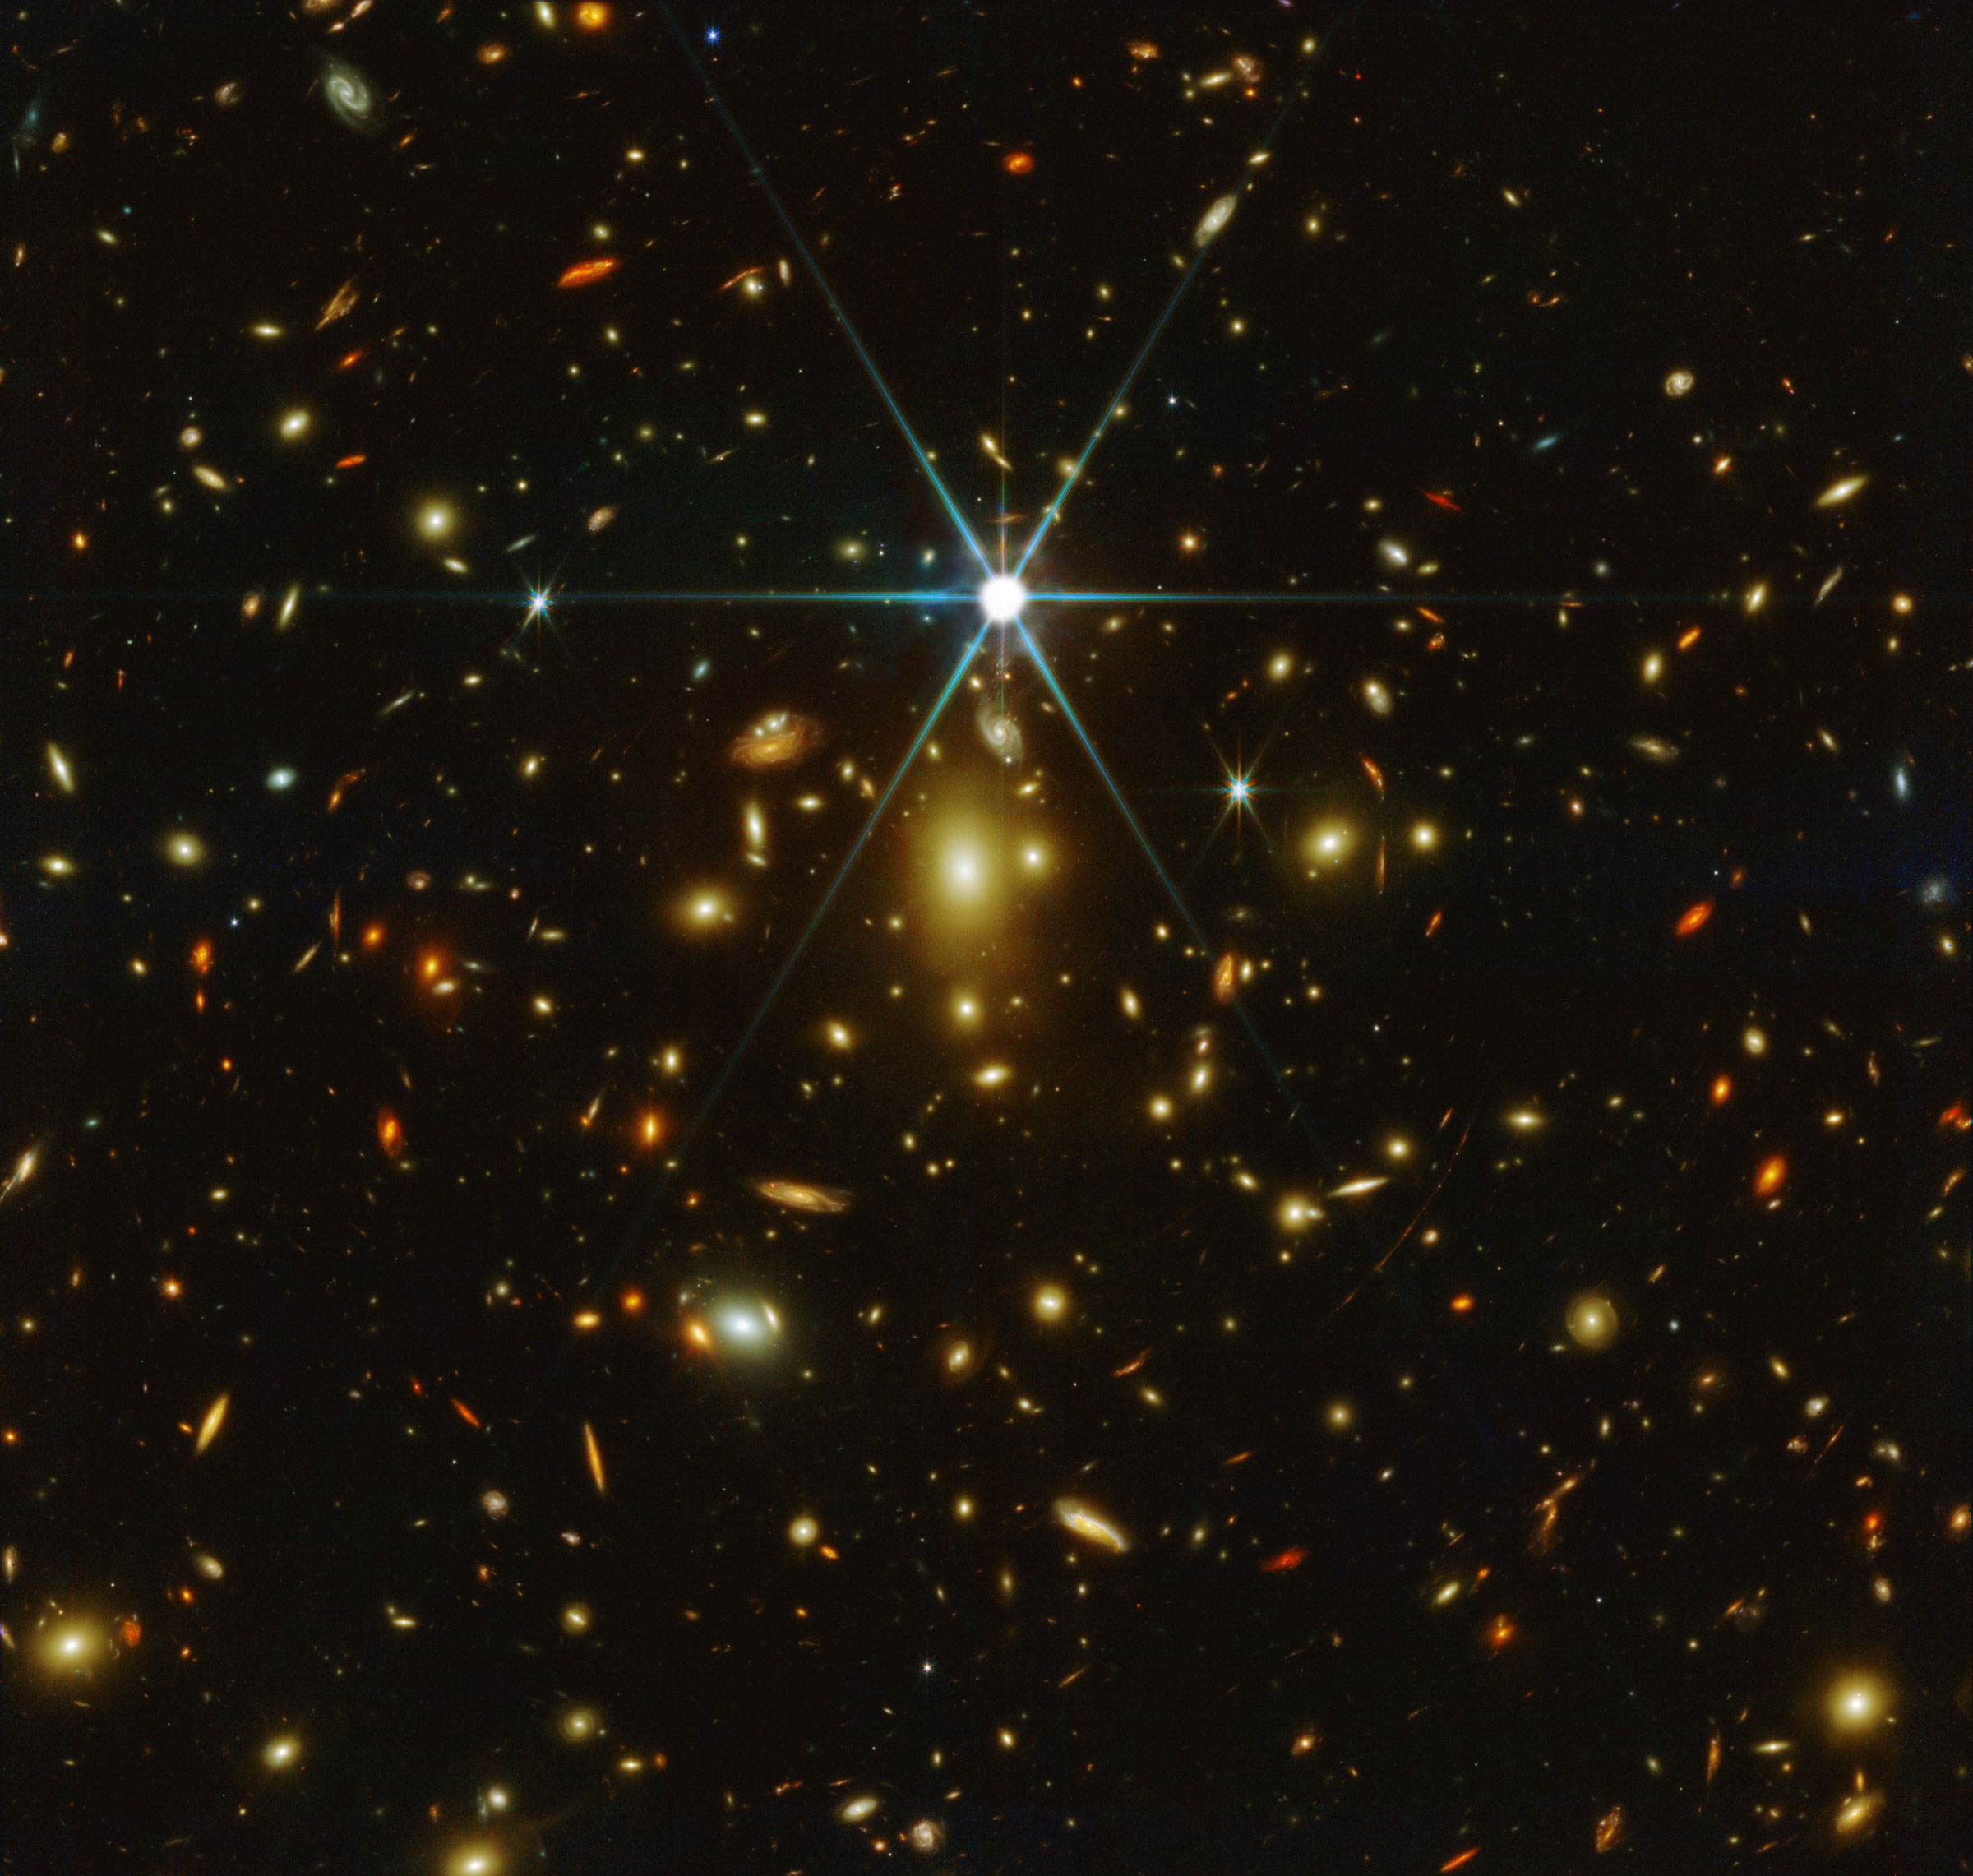 A cluster of galaxies including Earendel, the most distant star known in the universe, captured by the James Webb Space Telescope (NASA/ESA/CSA/STScI)